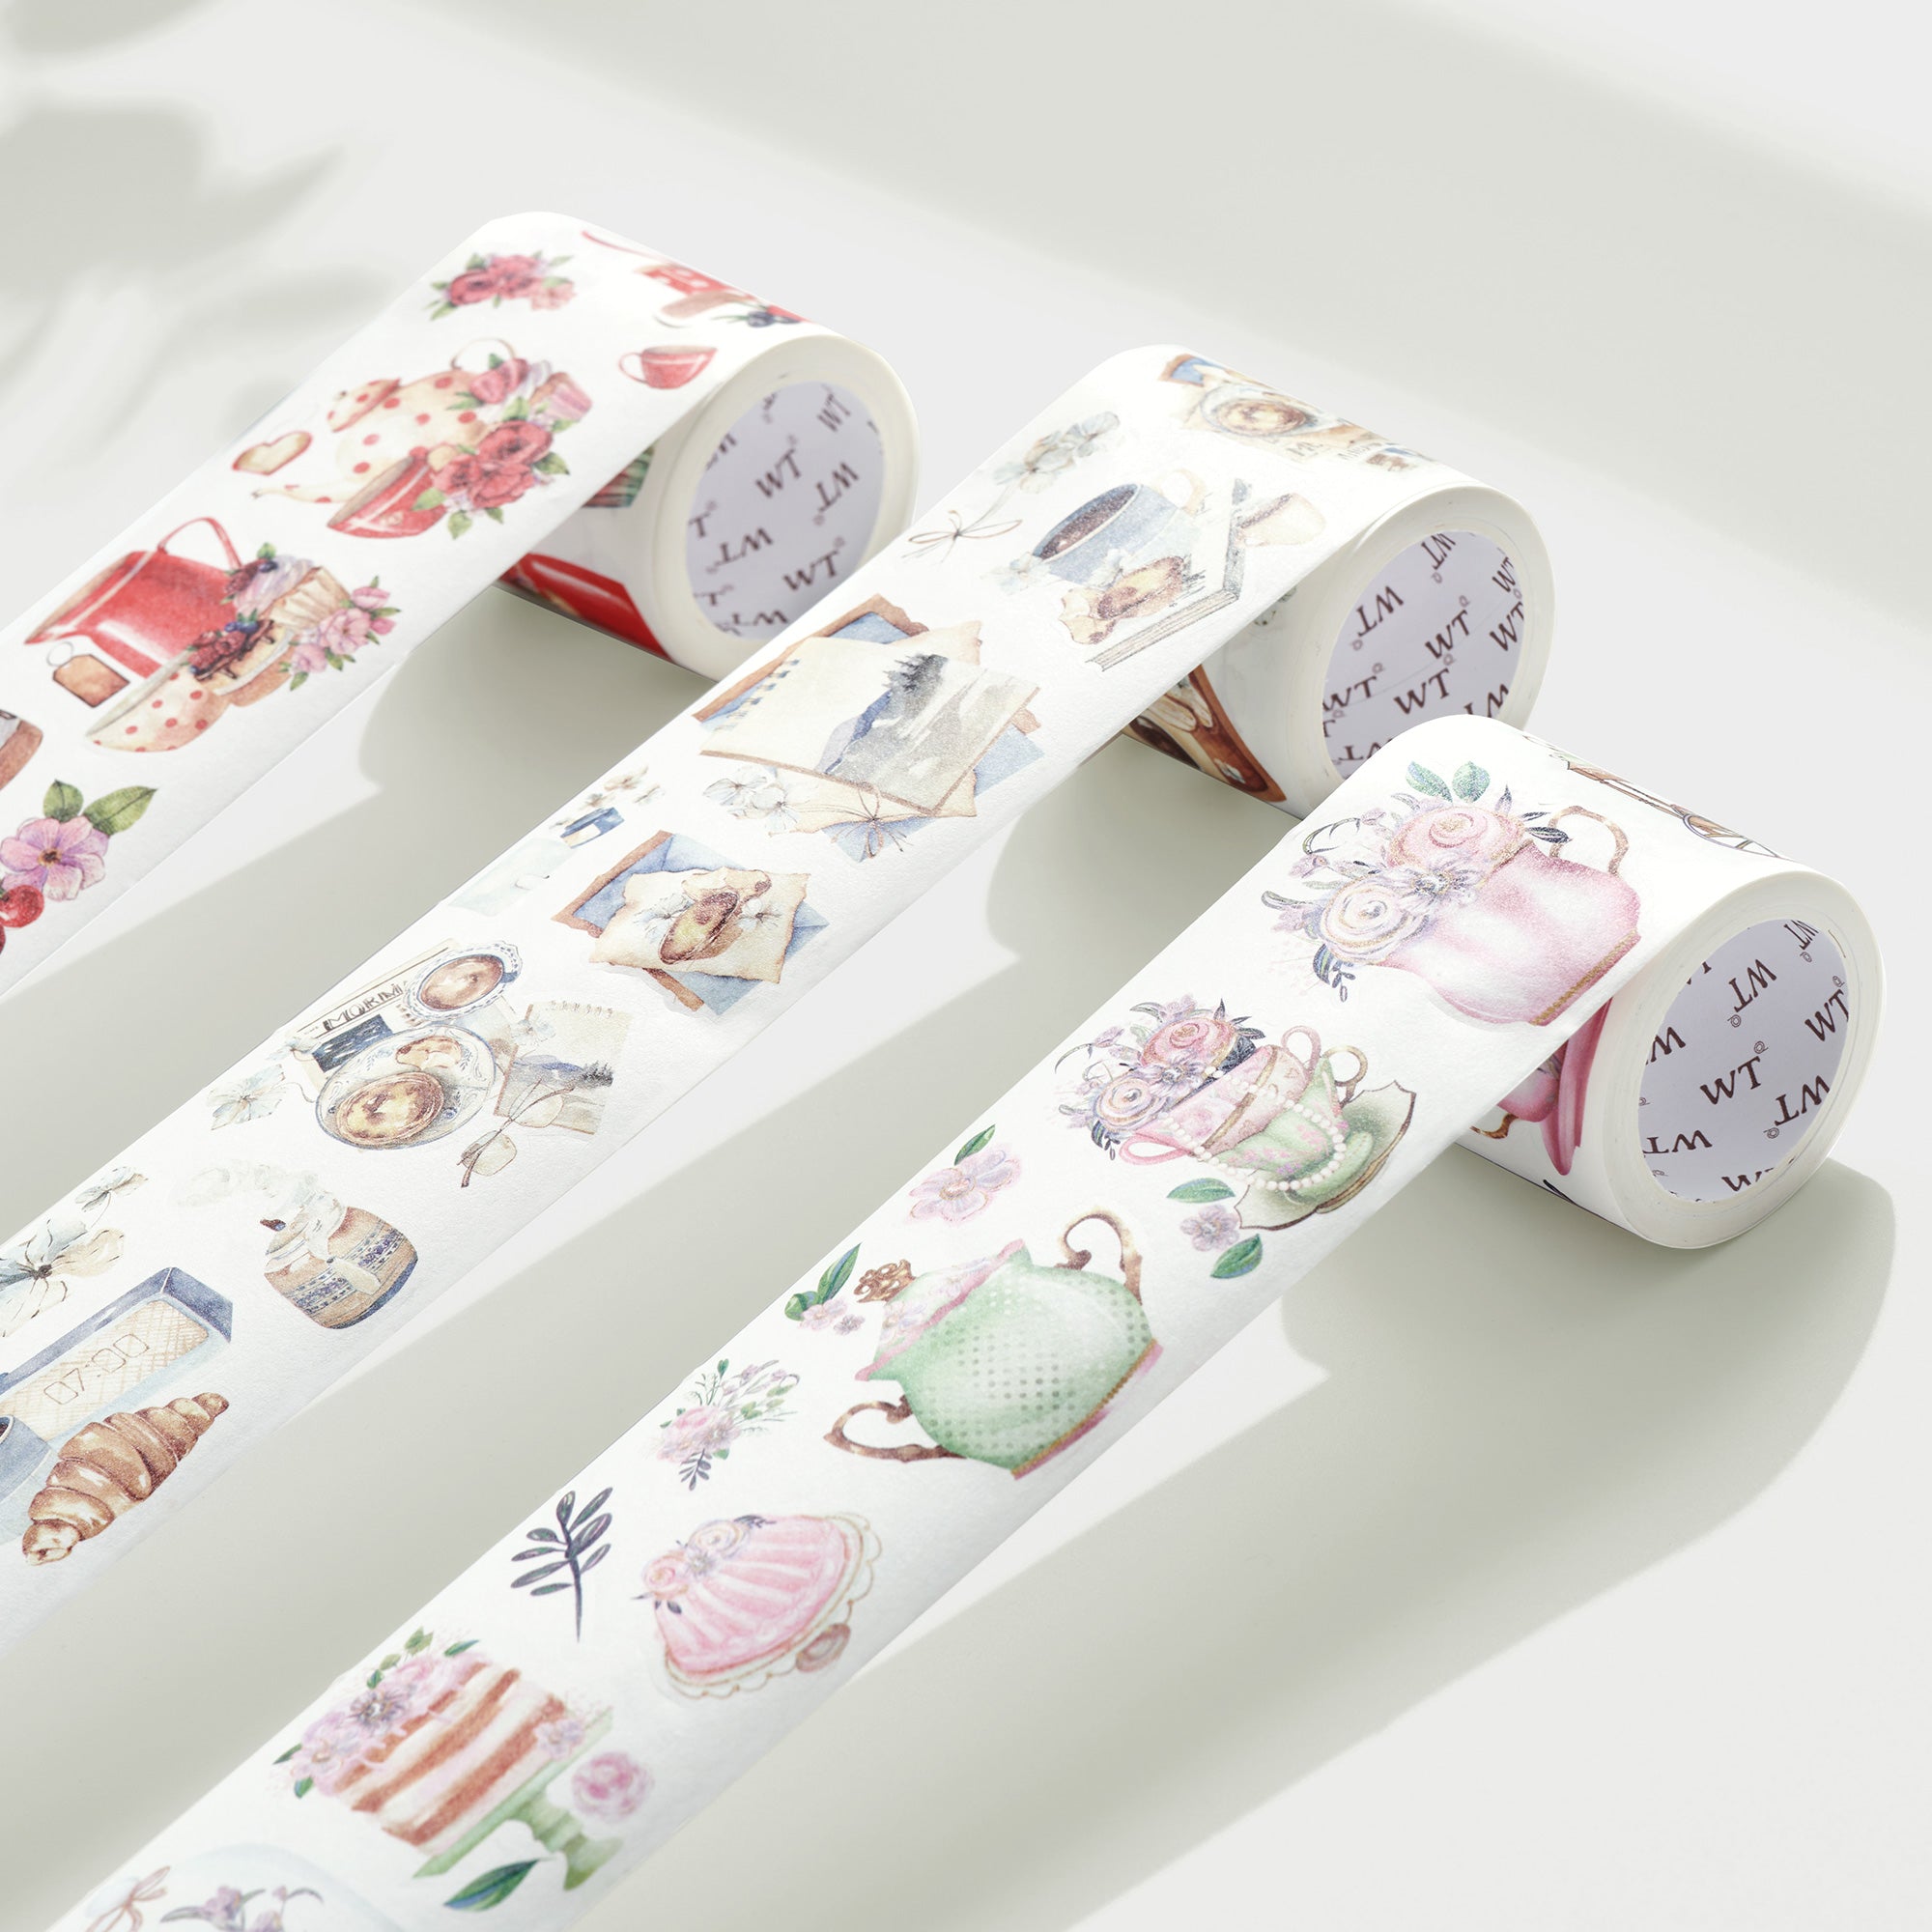 Tea Temptations Washi Tape Sticker Set | The Washi Tape Shop. Beautiful Washi and Decorative Tape For Bullet Journals, Gift Wrapping, Planner Decoration and DIY Projects